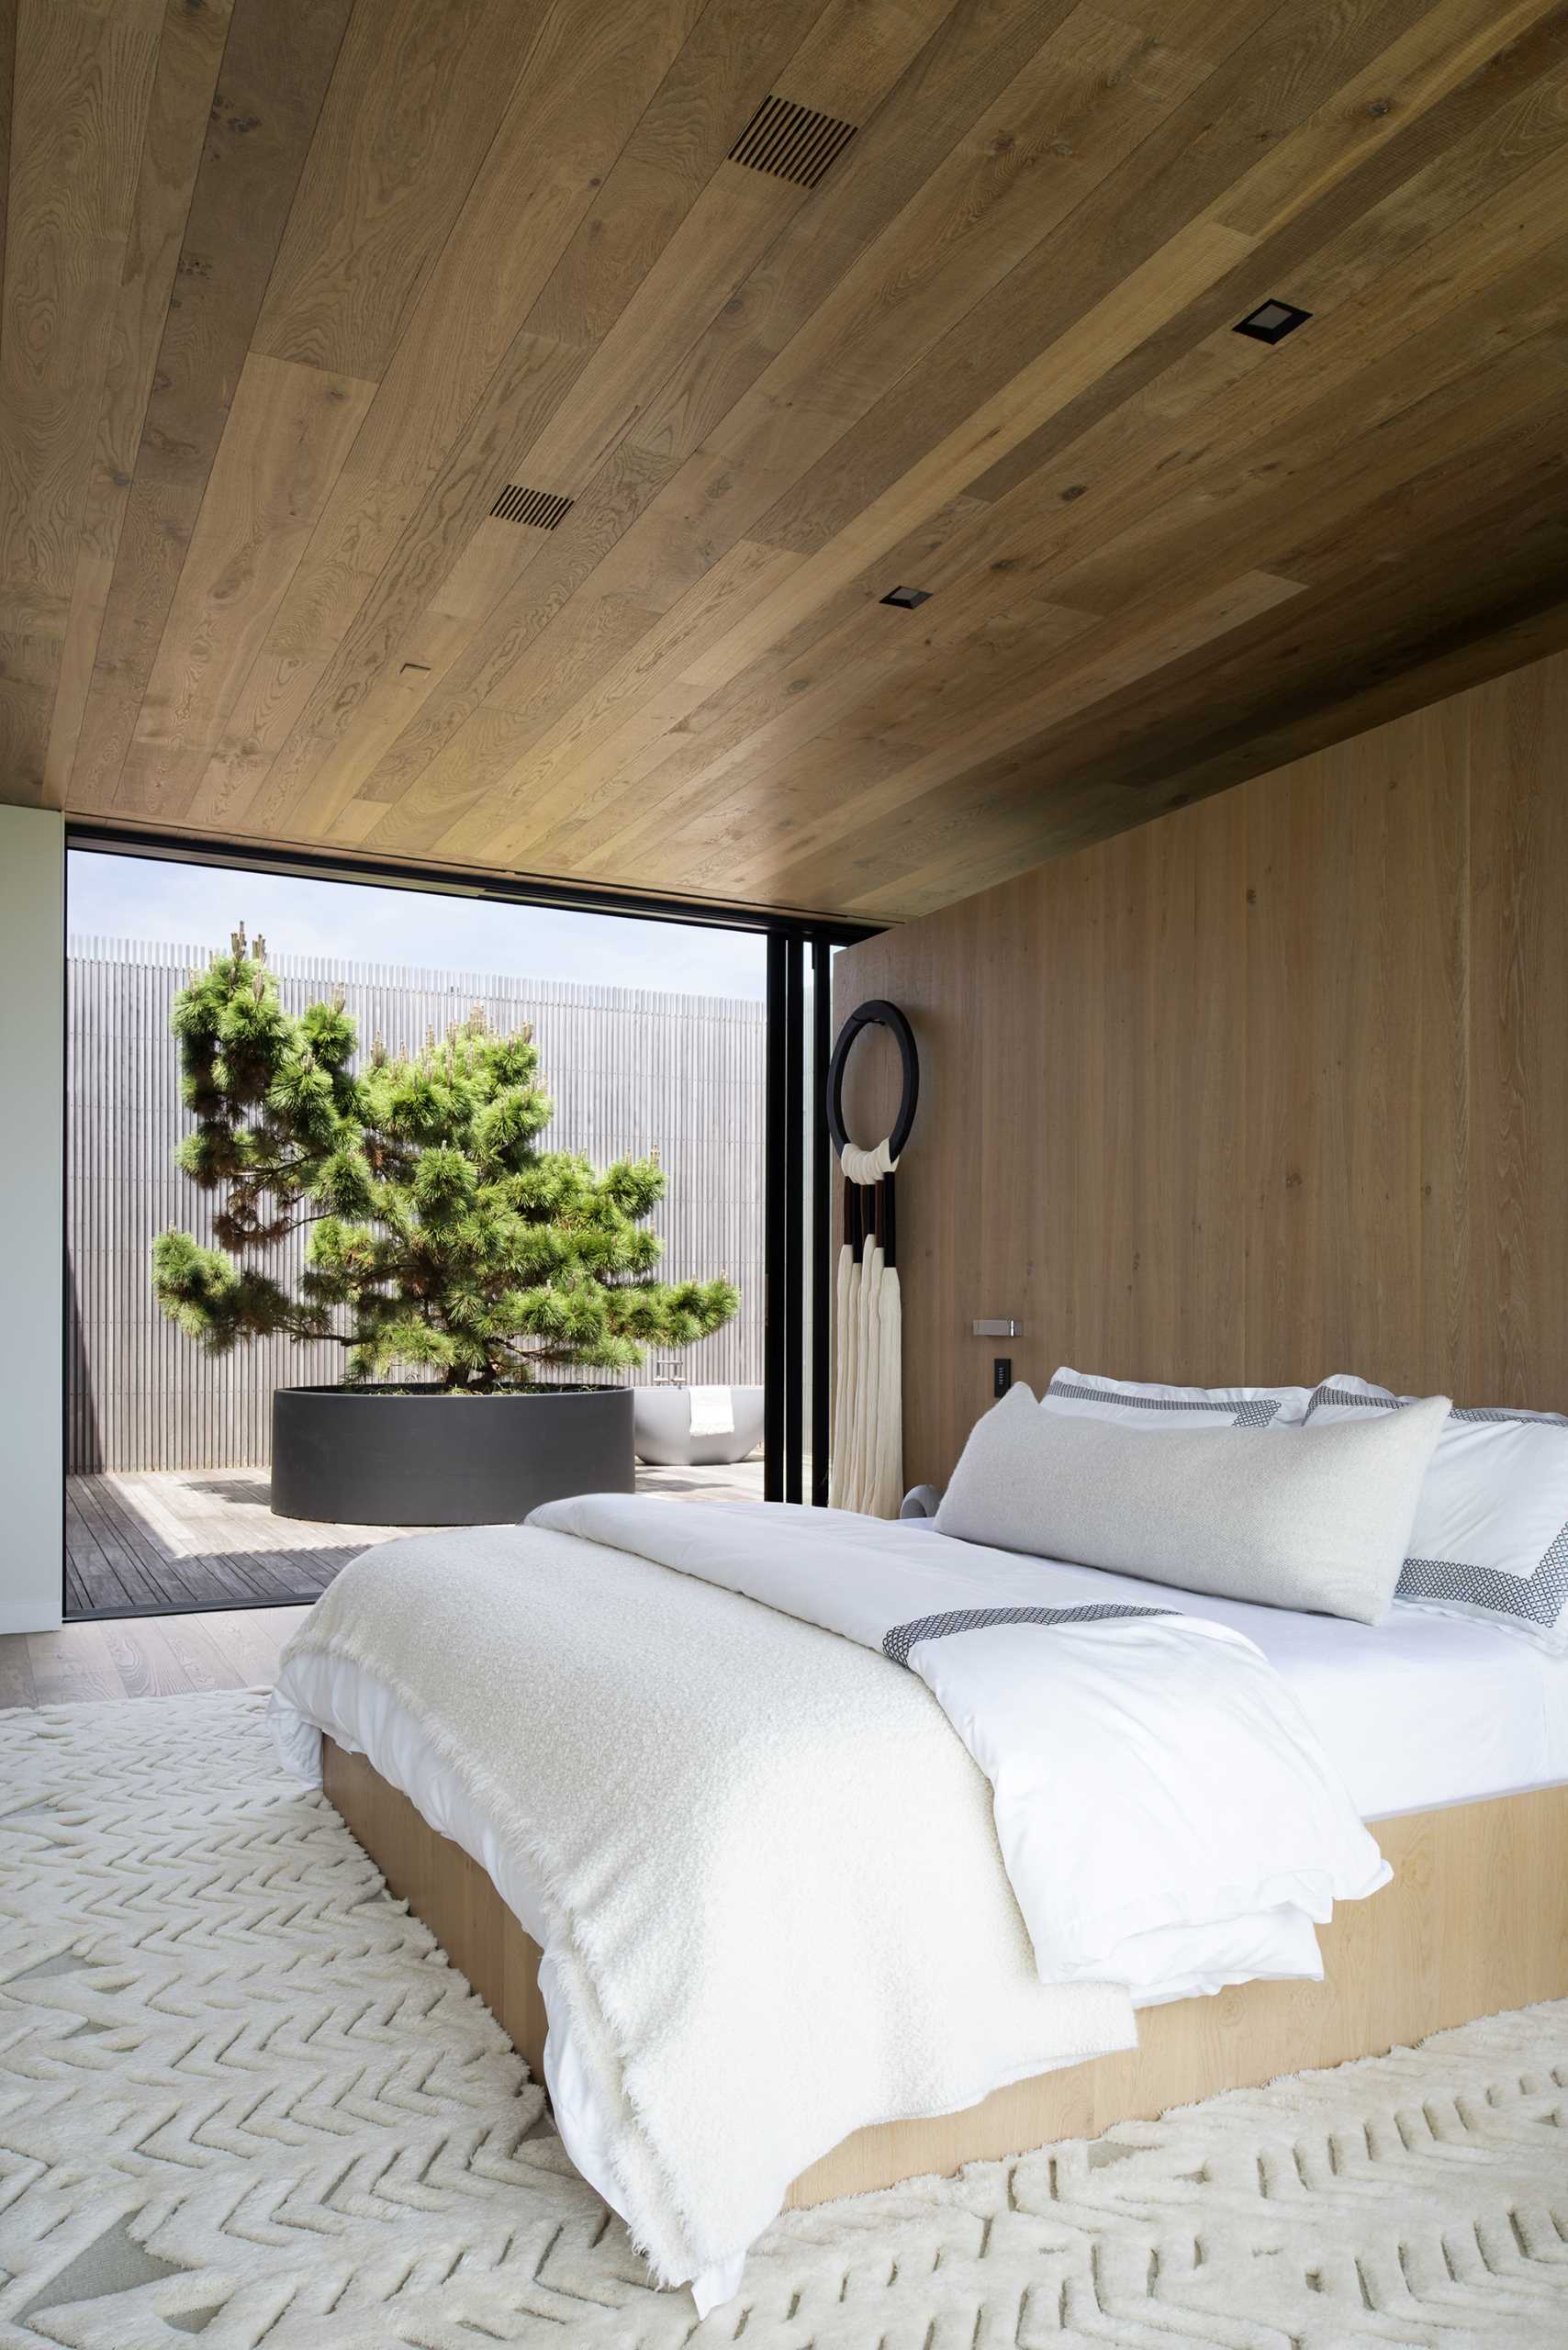 A modern bedroom with wood ceilings and a wood accent wall.